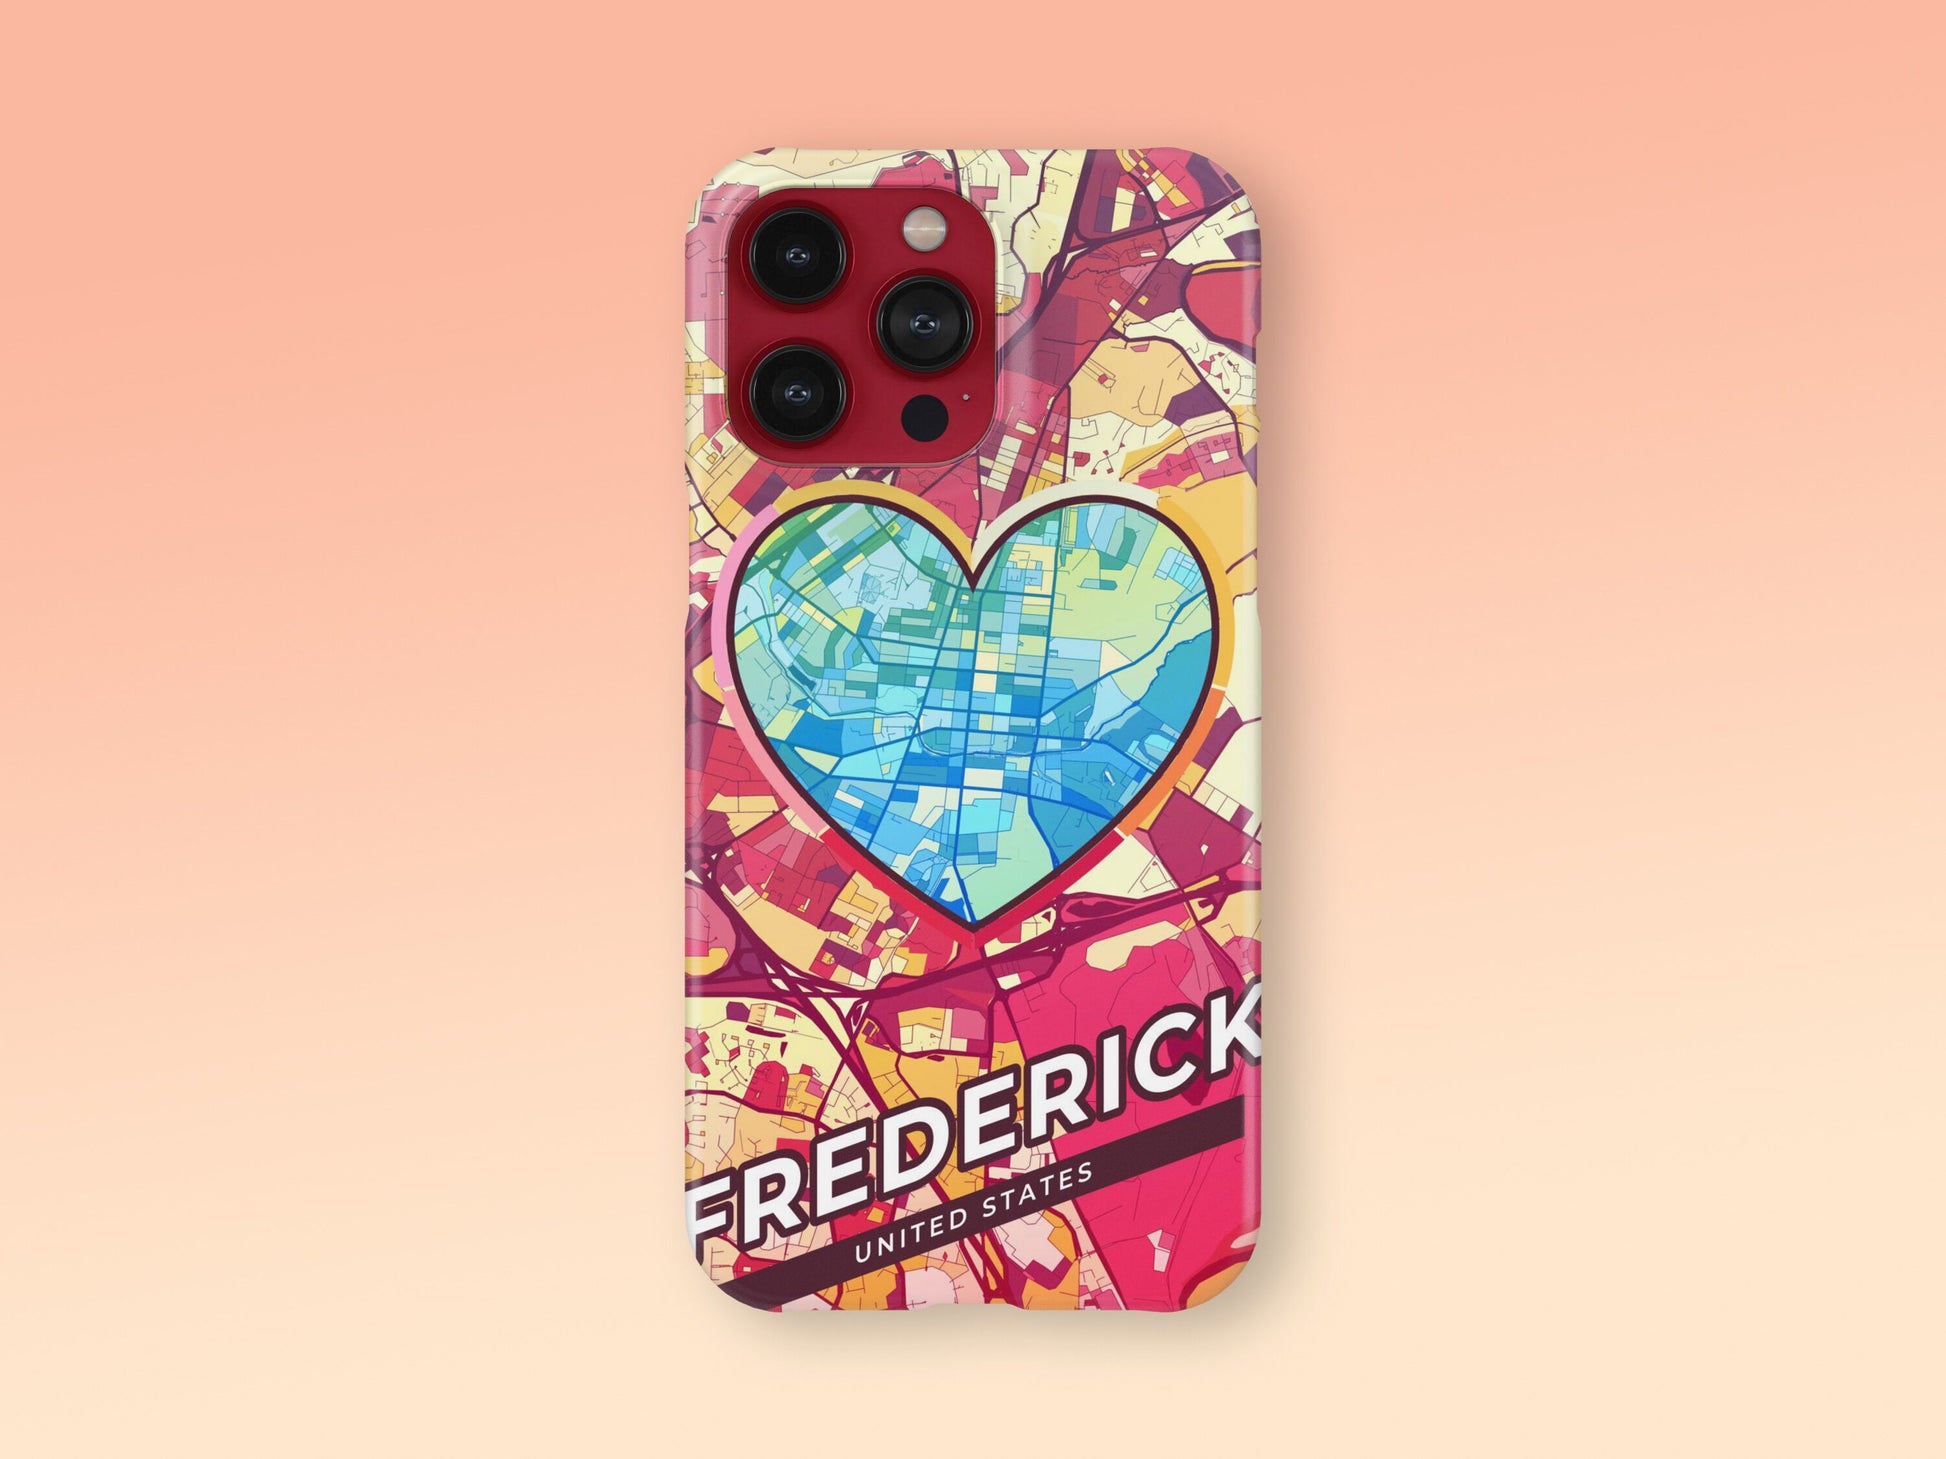 Frederick Maryland slim phone case with colorful icon. Birthday, wedding or housewarming gift. Couple match cases. 2